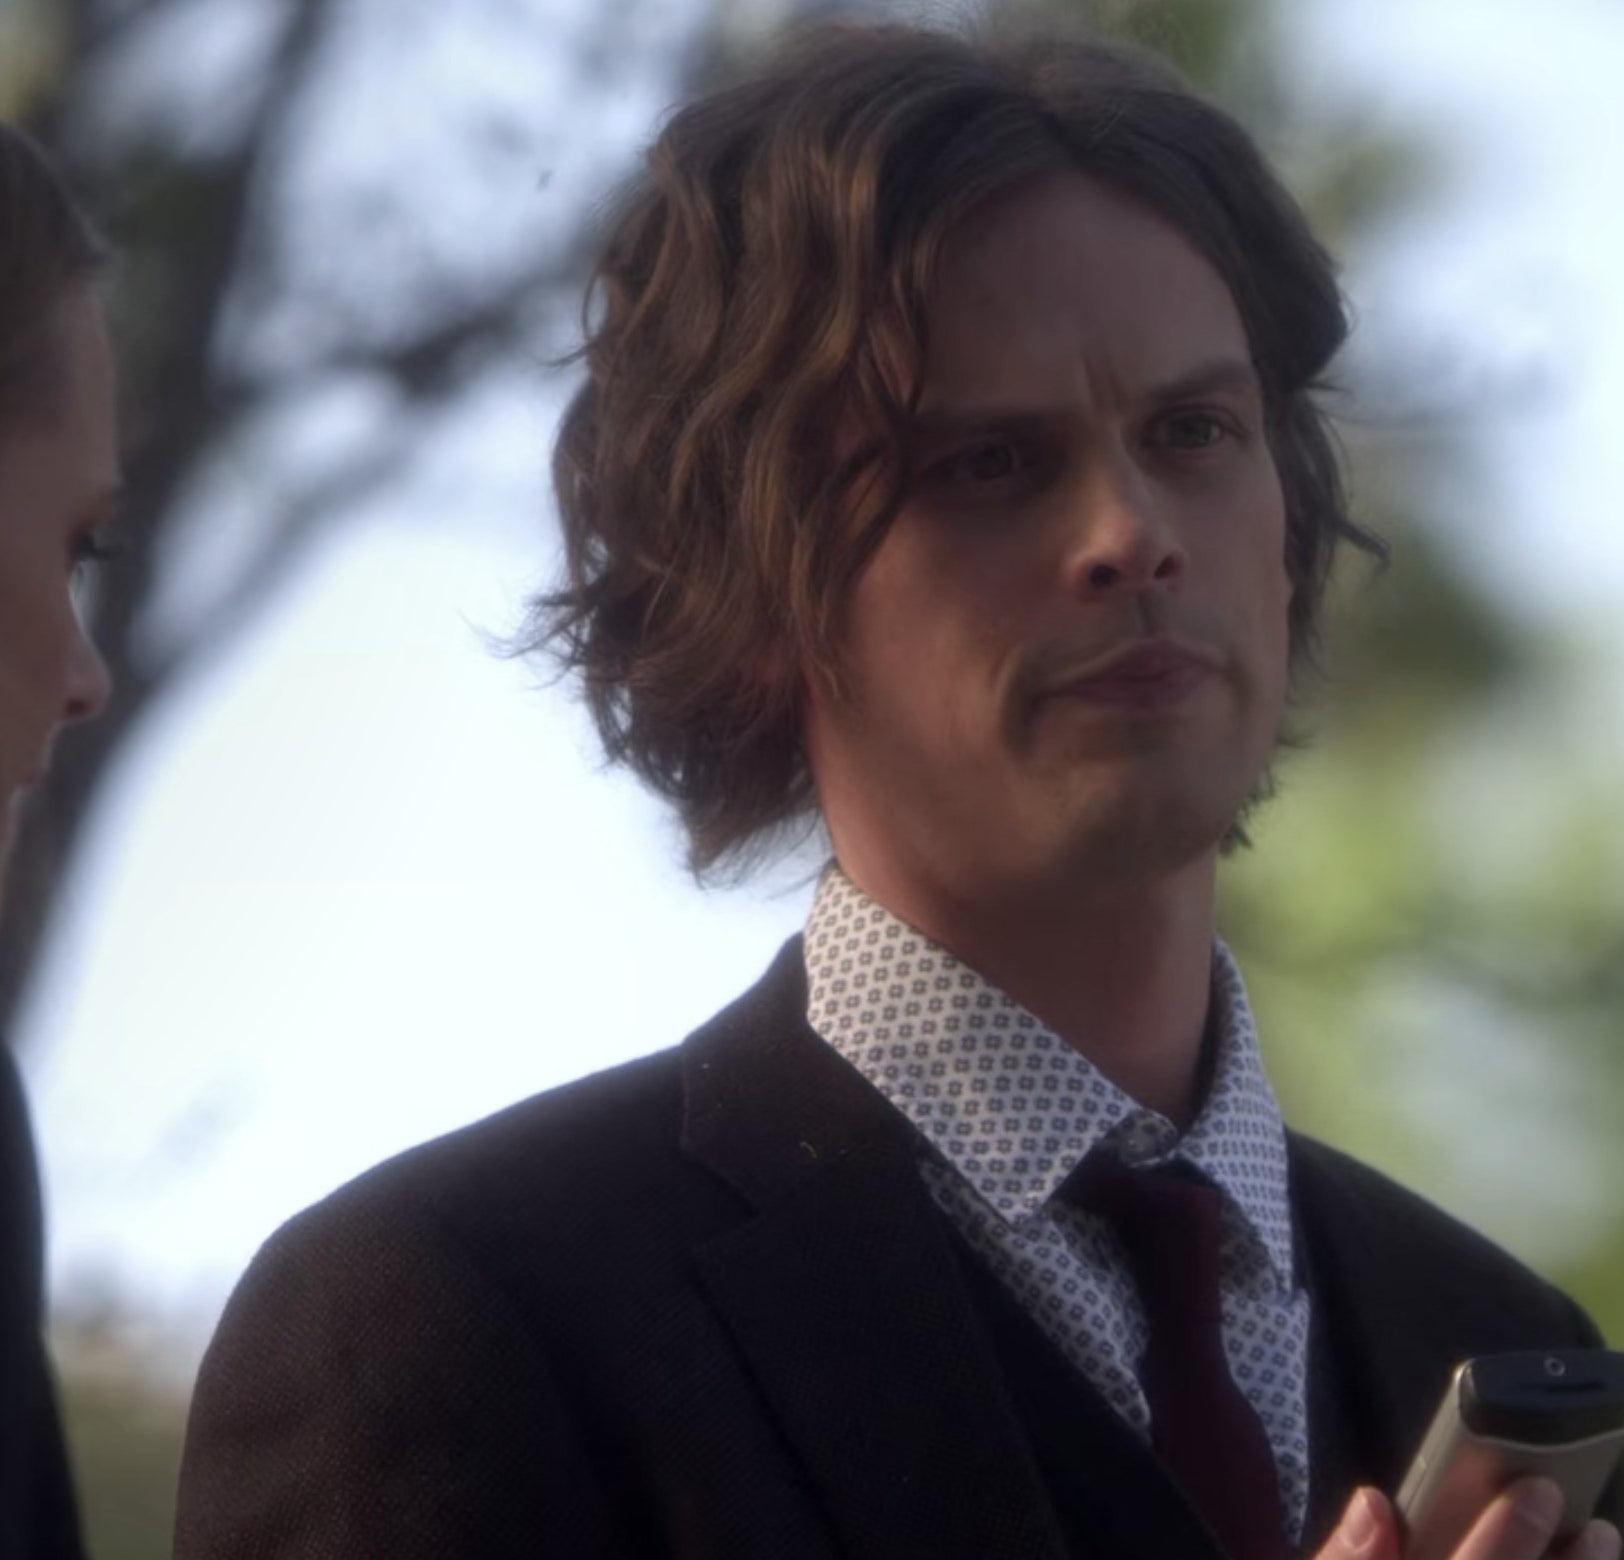 Spencer Reid from Criminal Minds talking and holding a phone